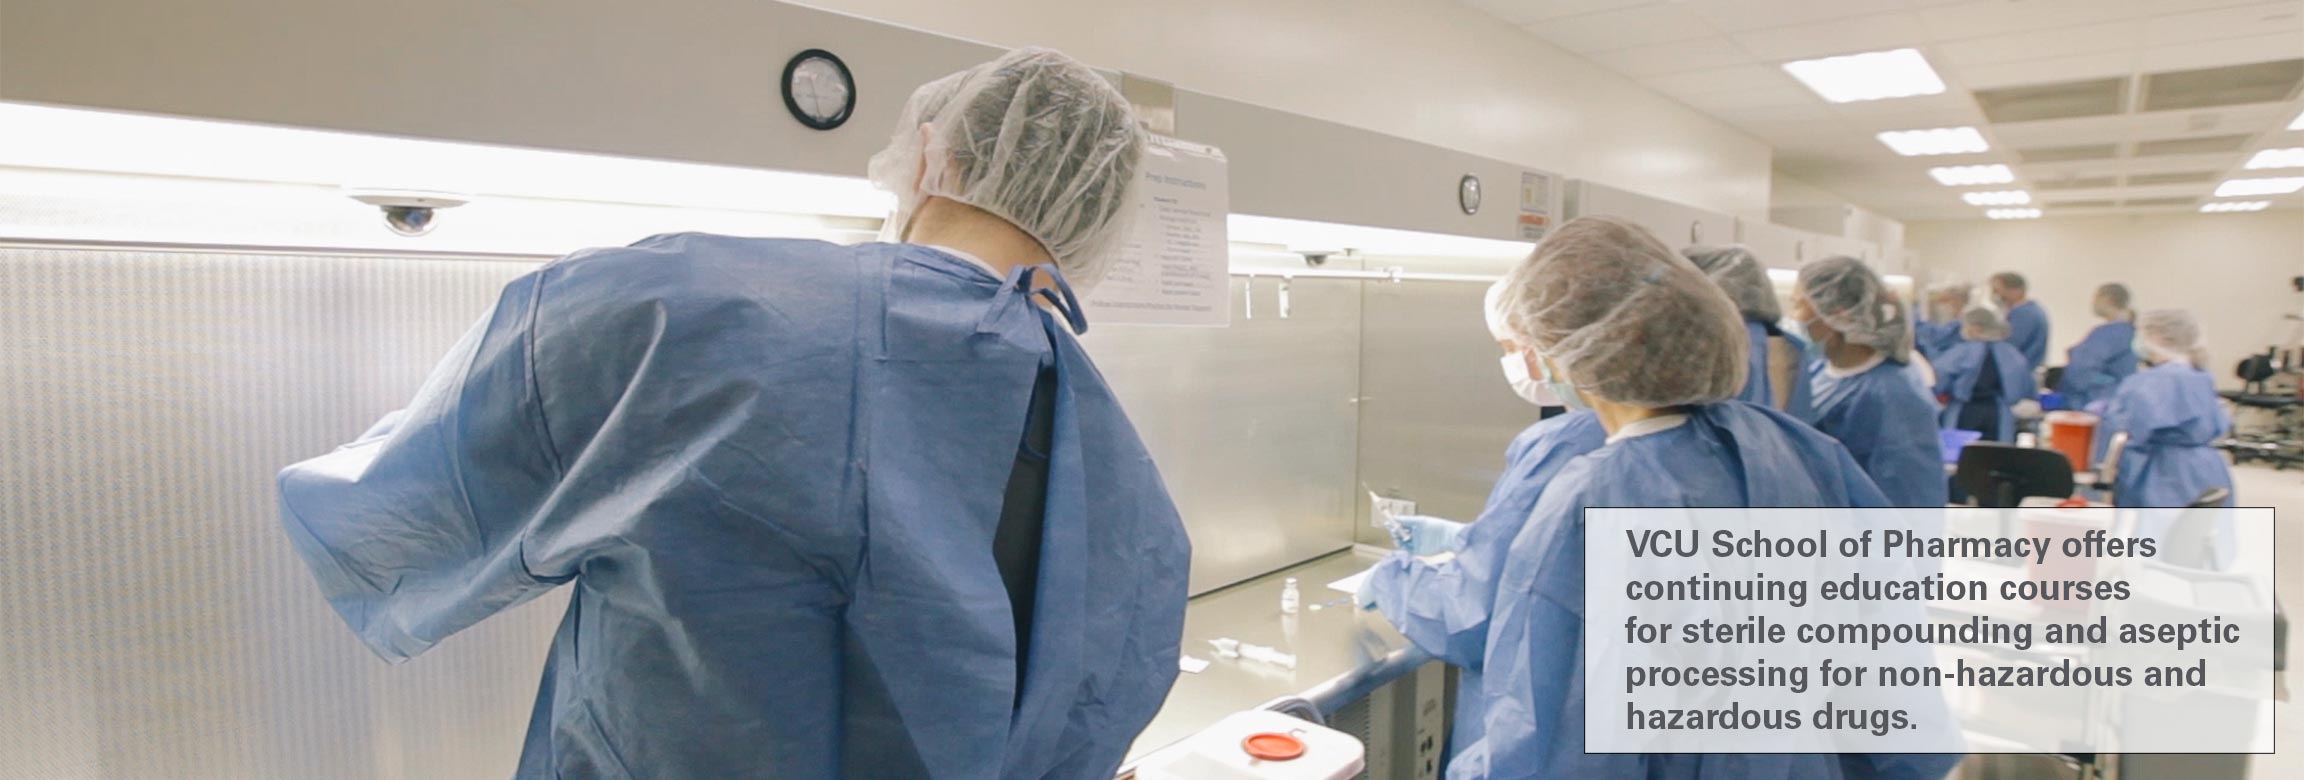 The VCU School of Pharmacy offers continuing education courses for sterile compounding and aseptic processing for non-hazardous and hazardous drugs